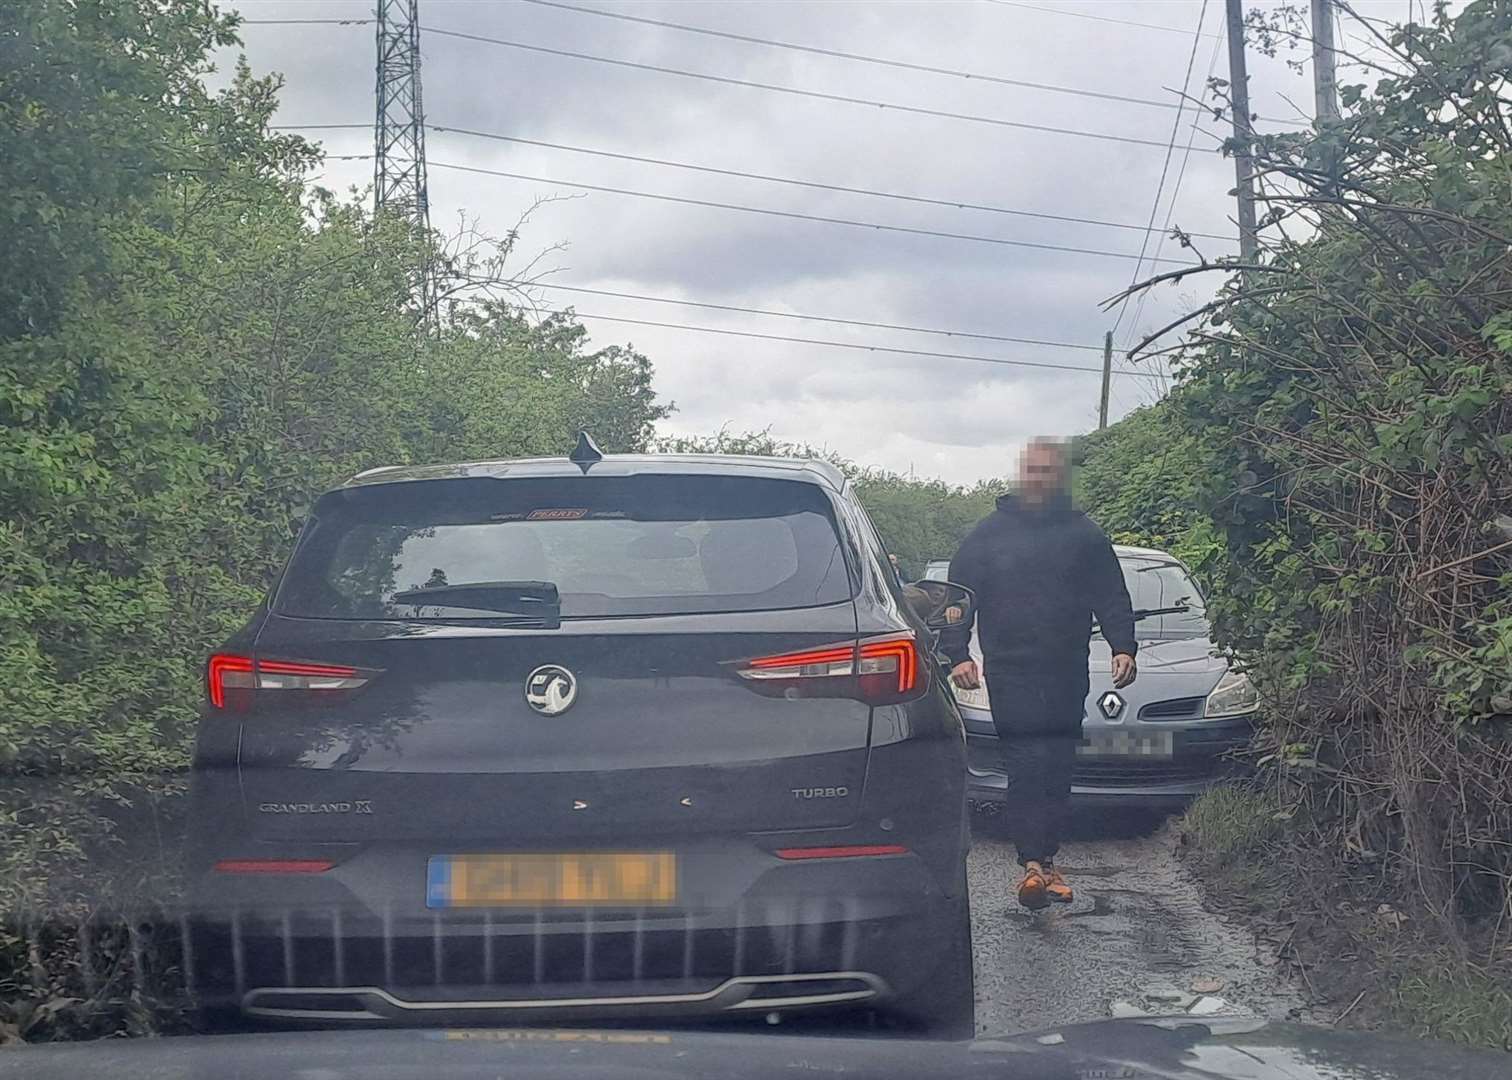 One man got out of his car to help vehicles pass along narrow Wraik Hill